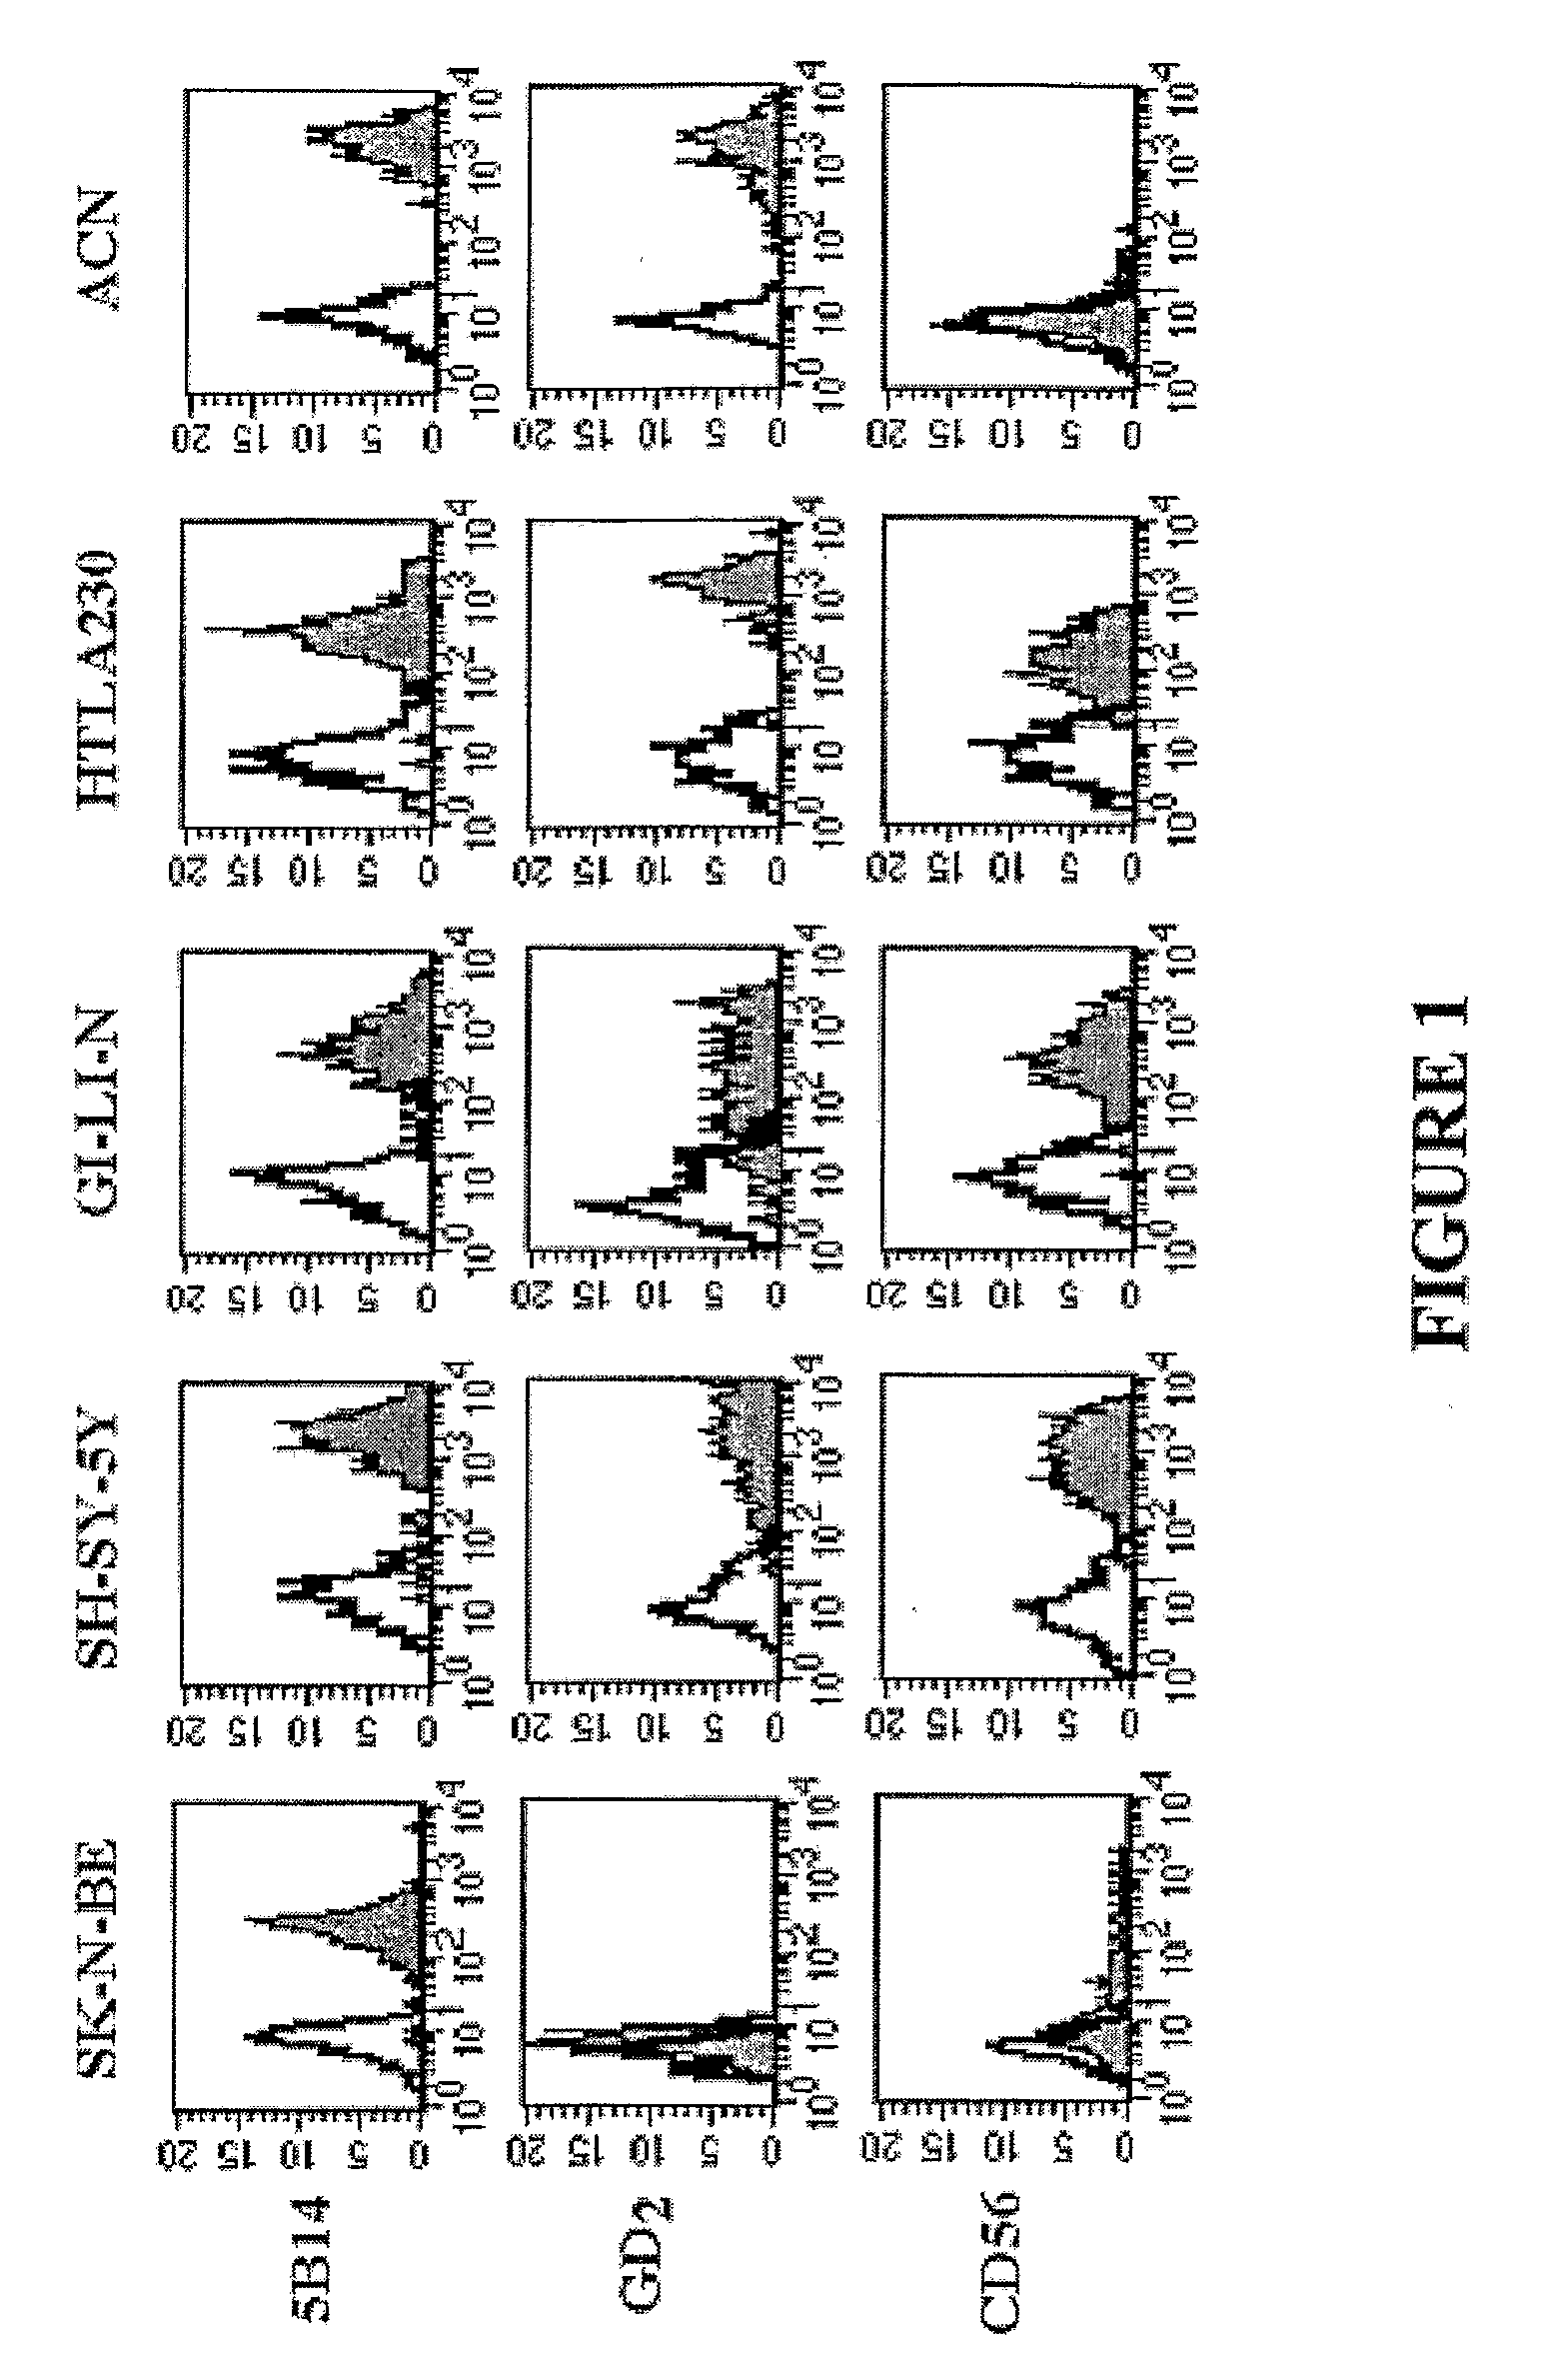 Therapeutic and Diagnostic Methods and Compositions Targeting 4Ig-B7-H3 and its Counterpart Nk Cell Receptor